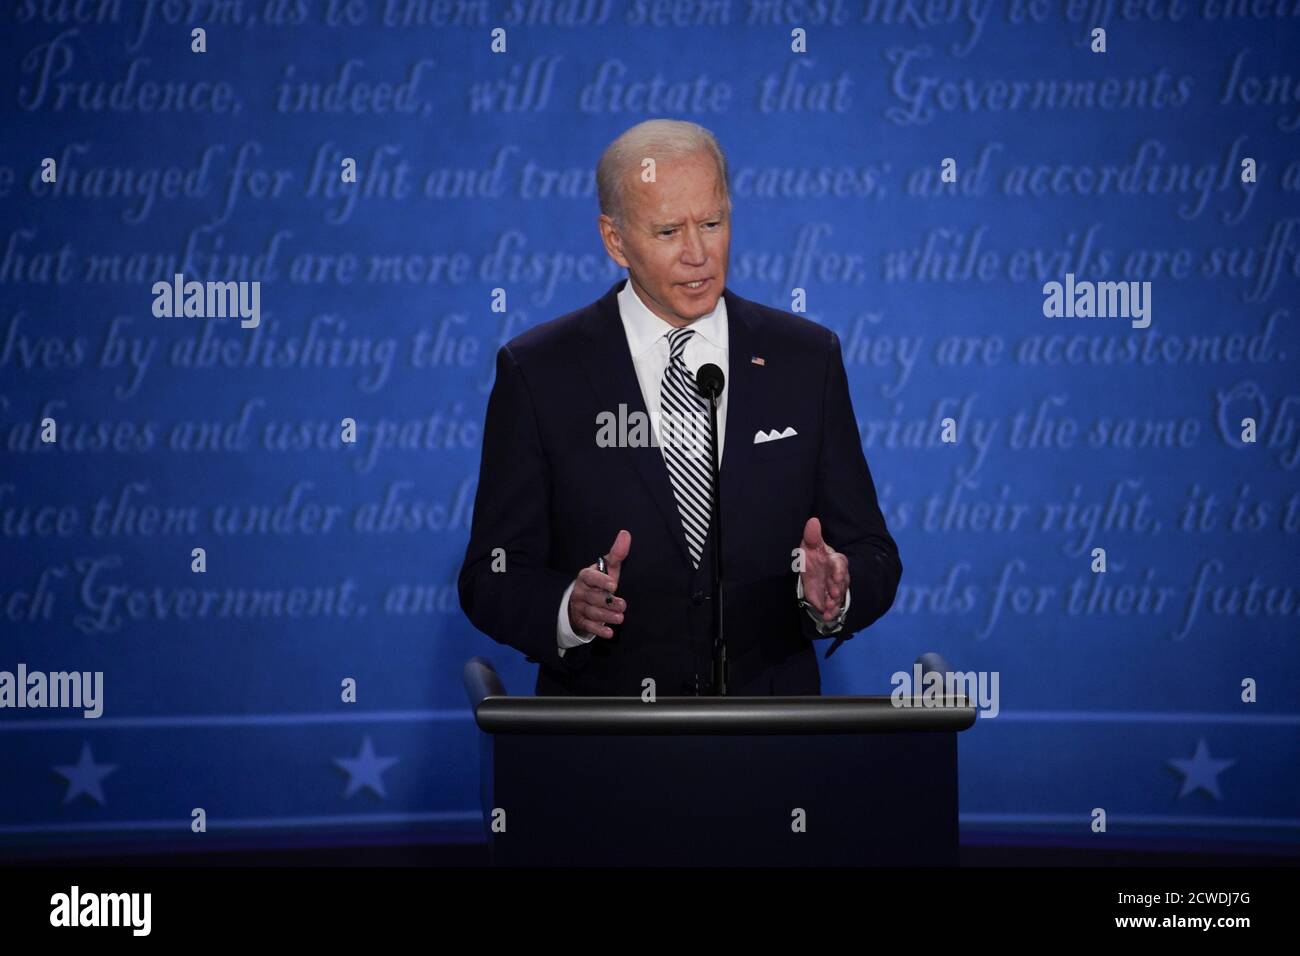 Cleveland, United States. 29th Sep, 2020. Joe Biden, 2020 Democratic presidential nominee, speaks during the first U.S. presidential debate hosted by Case Western Reserve University and the Cleveland Clinic in Cleveland, Ohio, on Tuesday, September 29, 2020. President Donald Trump and Biden kicked off their first debate with contentious topics like the Supreme Court and the coronavirus pandemic. Photo by Matthew Hatcher/UPI Credit: UPI/Alamy Live News Stock Photo